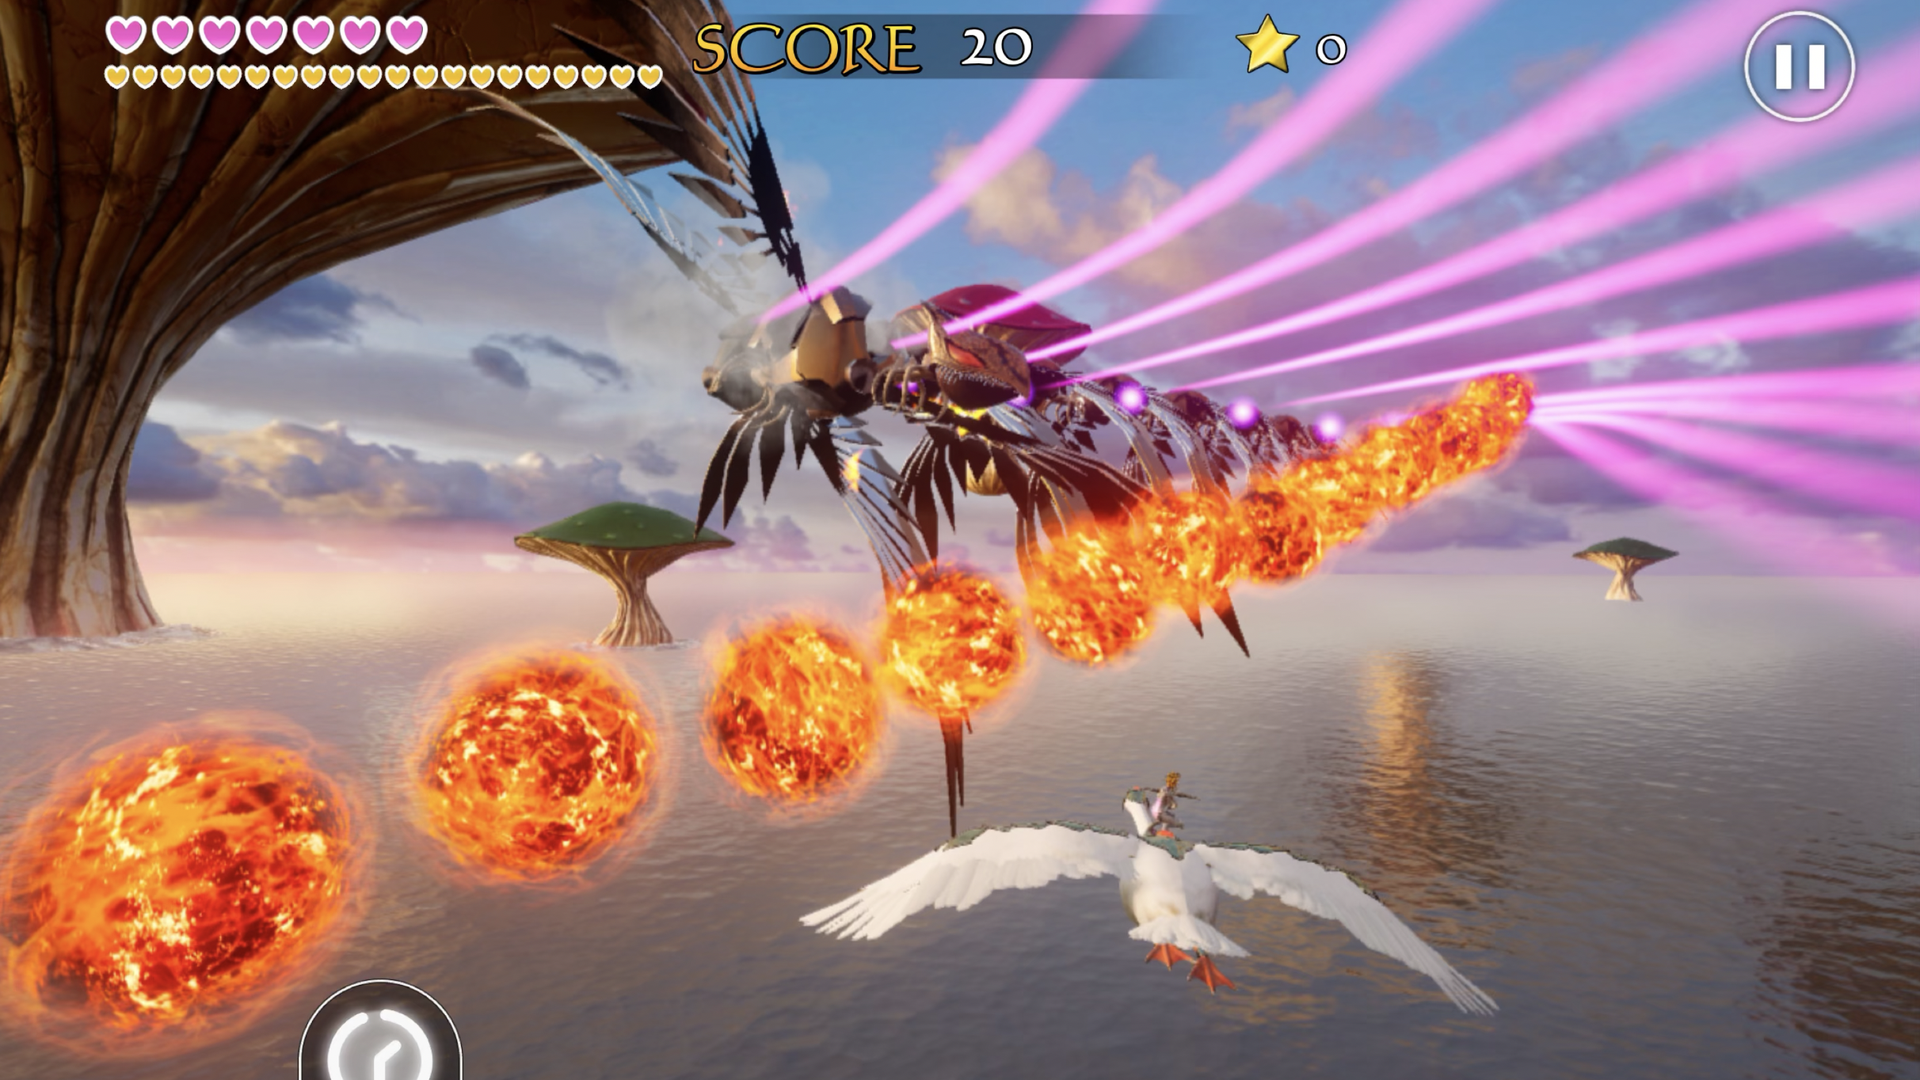 Video game screenshot of aerial combat involving a bird, fireballs and pink lasers